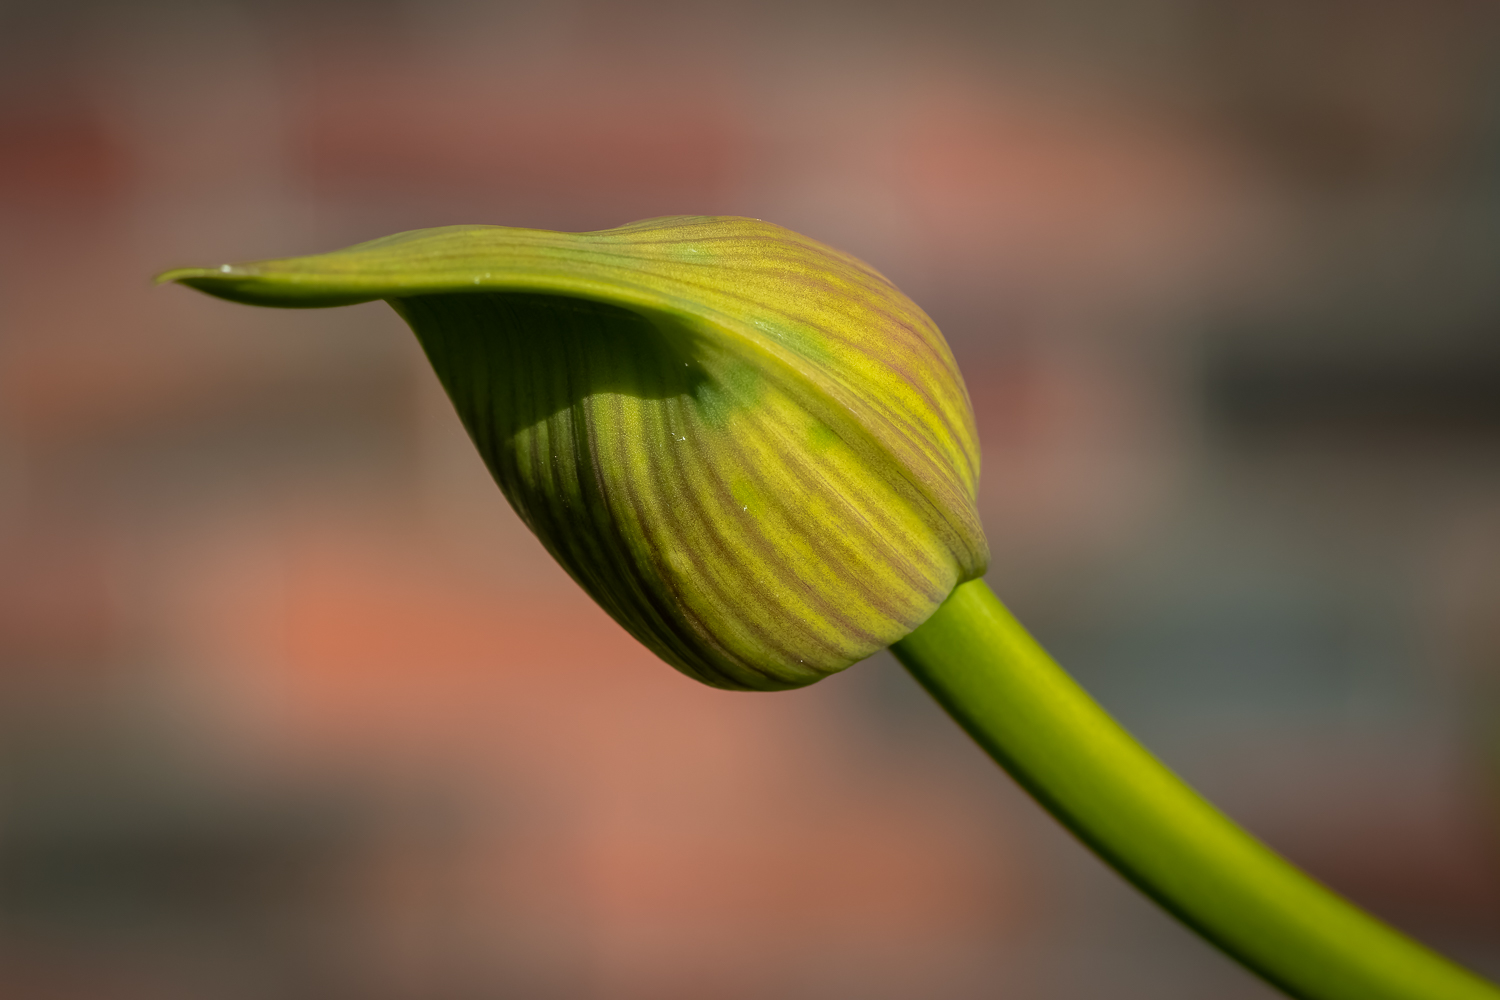 A horizontal agapanthus bud against a red background